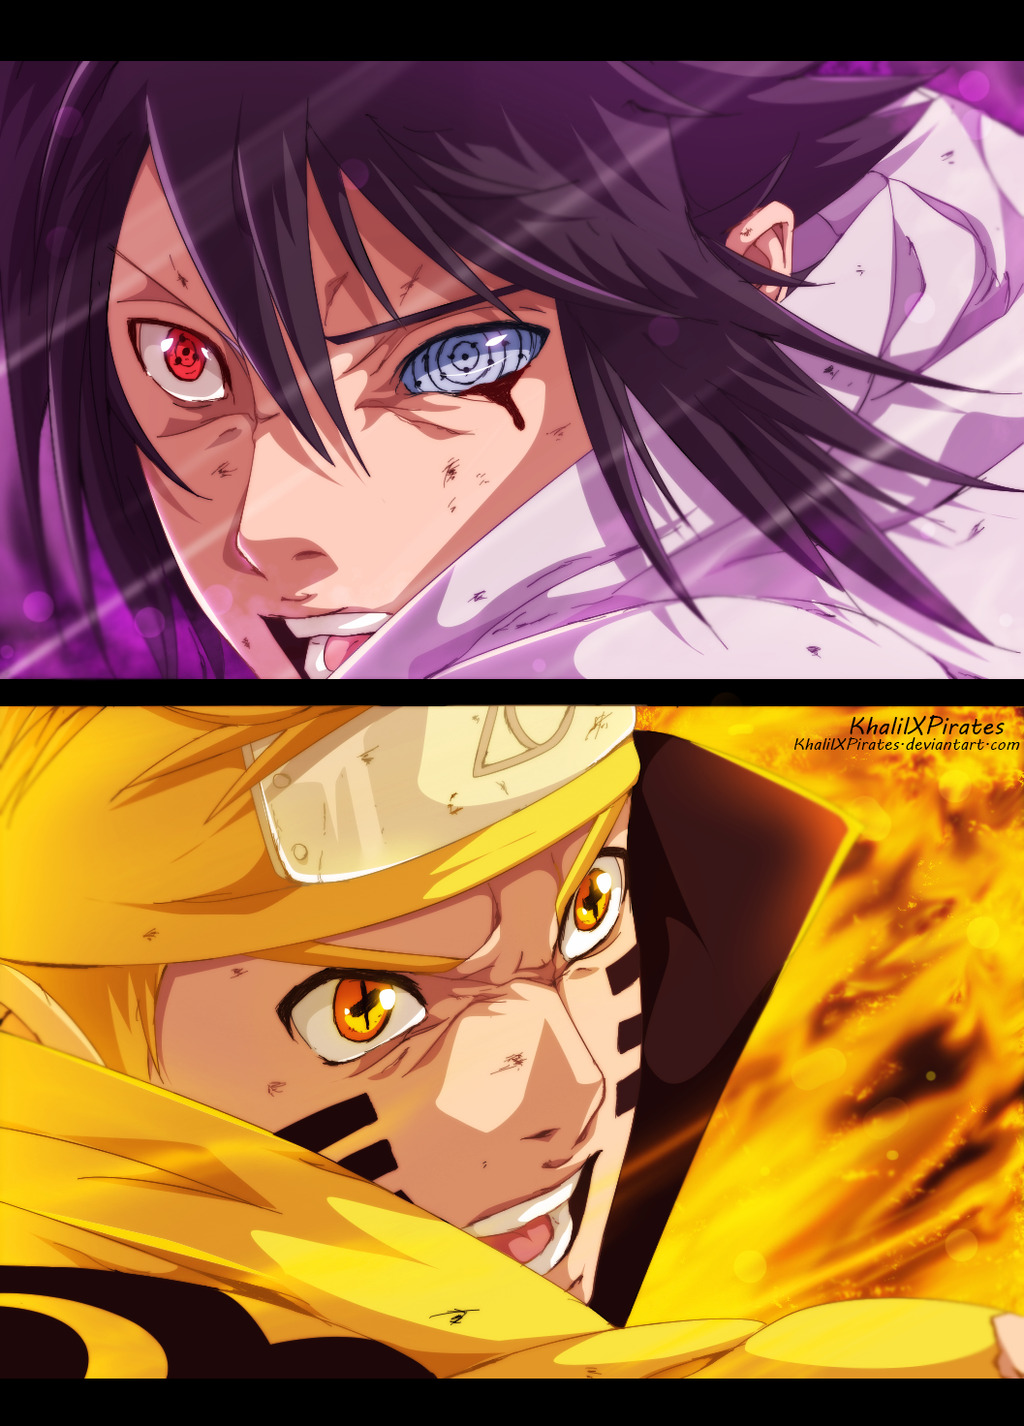 naruto_689___let_s_finish_this_____by_khalilxpirates-d8bavxd